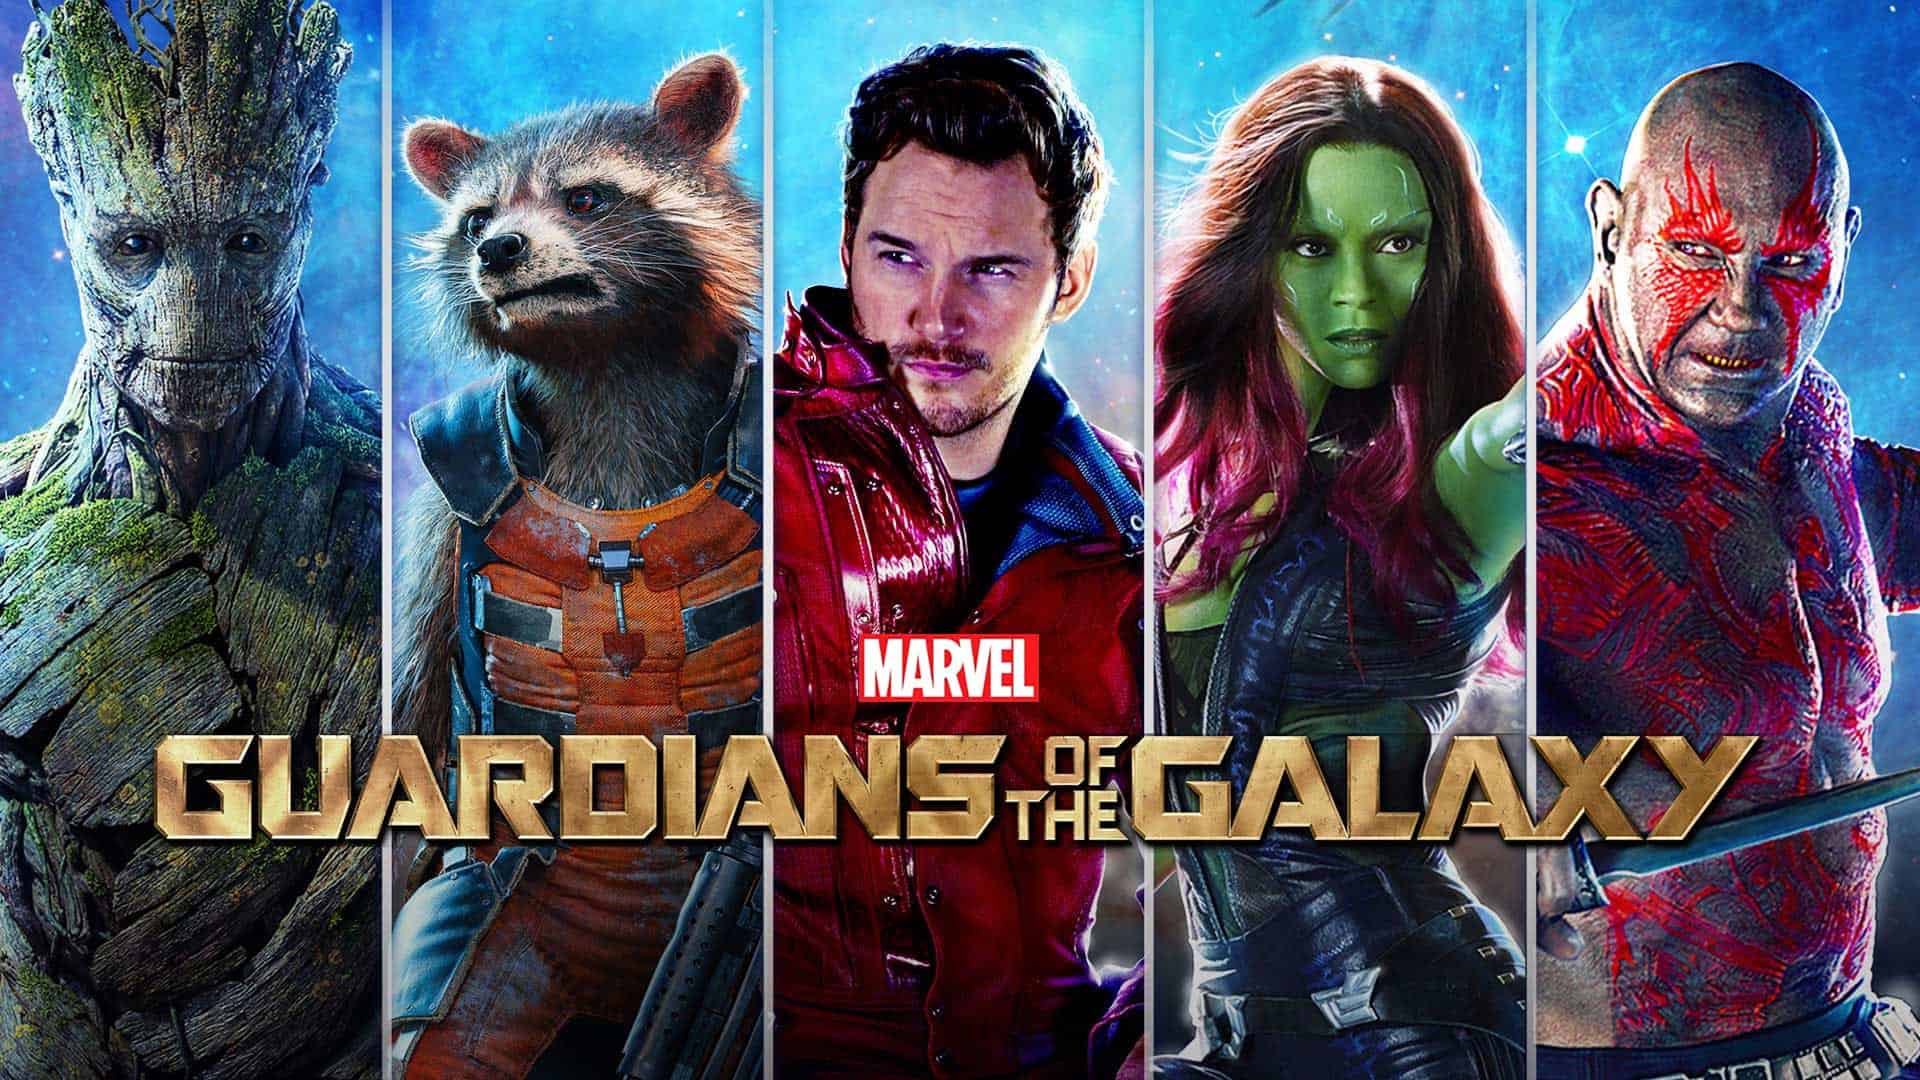 1655bfa0e43b2c2ac2d5e47880c1fc4bb86d2e02bbb648df31784ceb50820799 Guardians Of The Galaxy Vol. 3: Incredible Mid-Credit and Post-Credit Scenes (April 29) 